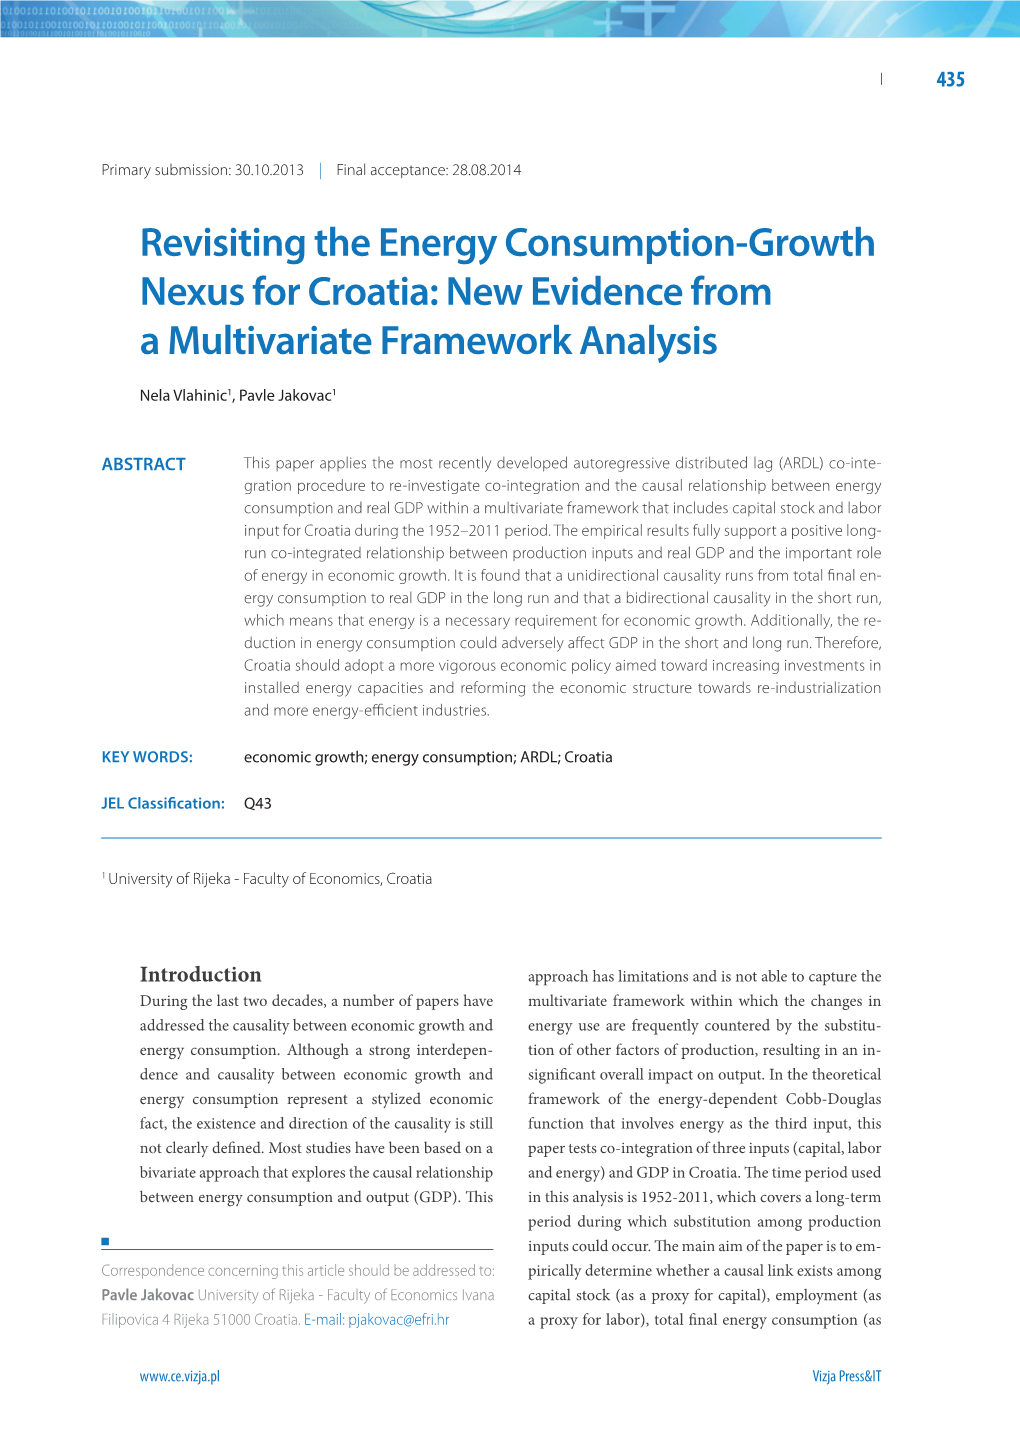 Revisiting the Energy Consumption-Growth Nexus for Croatia: New Evidence from a Multivariate Framework Analysis